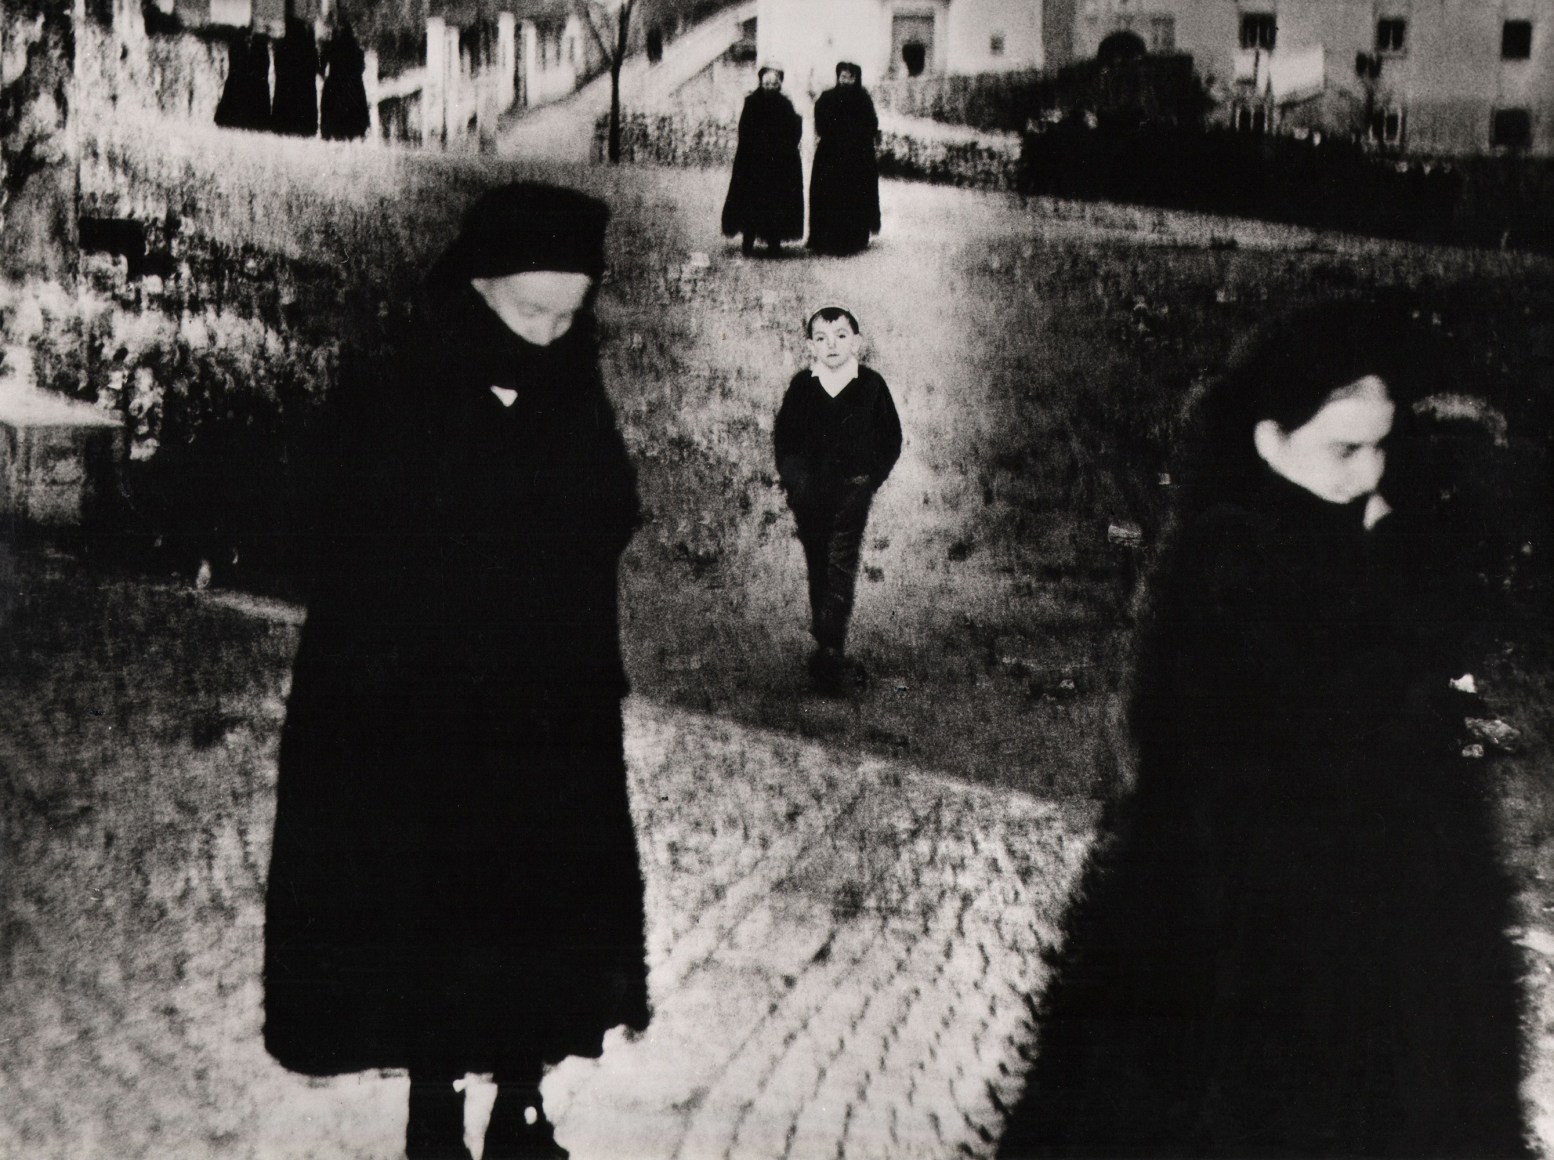 Mario Giacomelli, Scanno, ​1959/1970. High-contrast street scene with figures in black, with the central focus a young boy with hands in pockets looking to the camera.